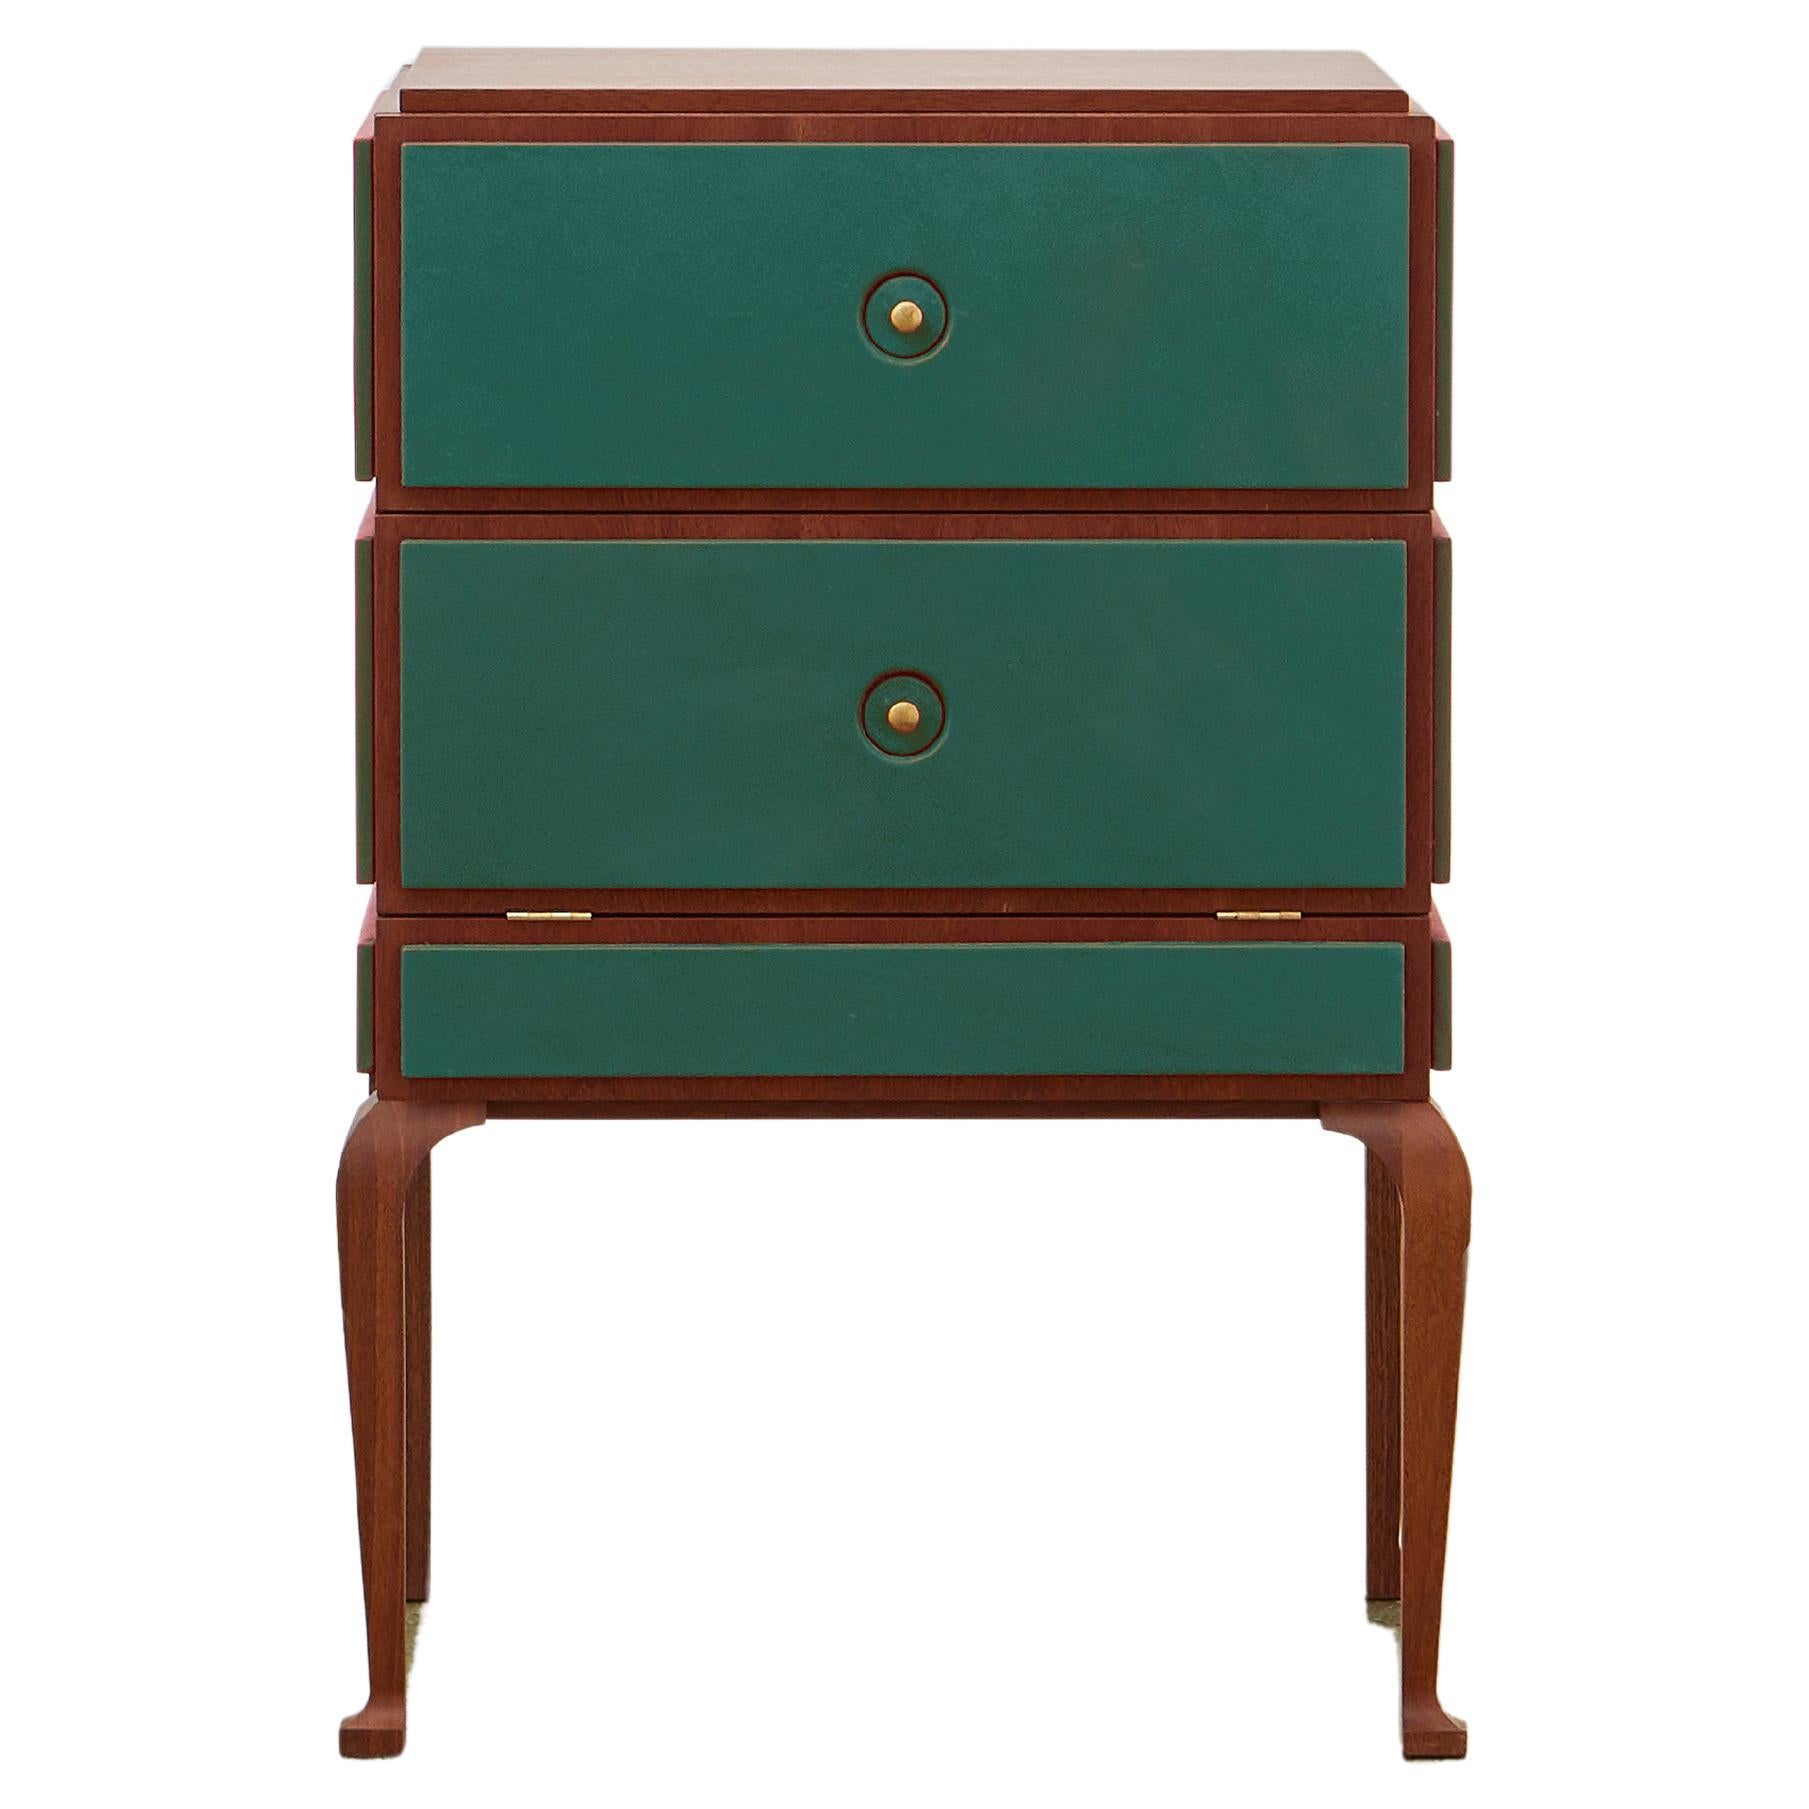 PH Small Drawer Chest, Mahogany, Emerald Green Leather, Wood legs, Ash Drawers For Sale